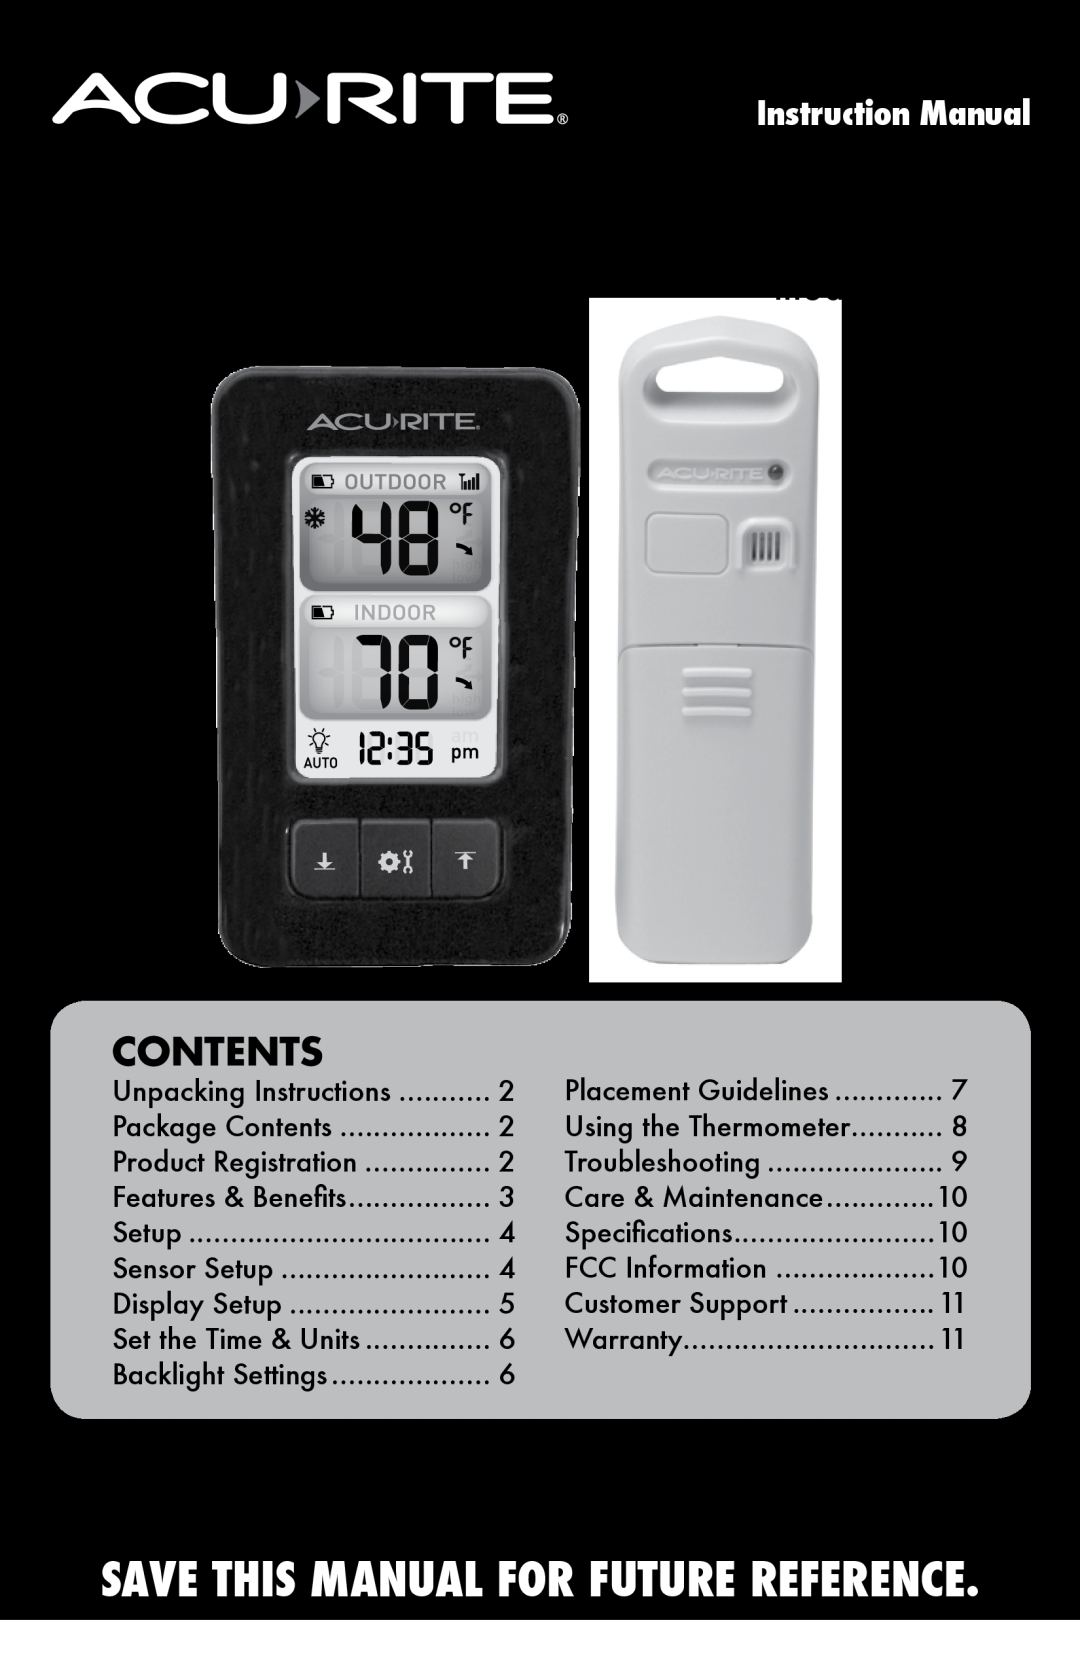 Acu-Rite instruction manual Contents, model 02029W, Thermometer, Save This Manual For Future Reference 